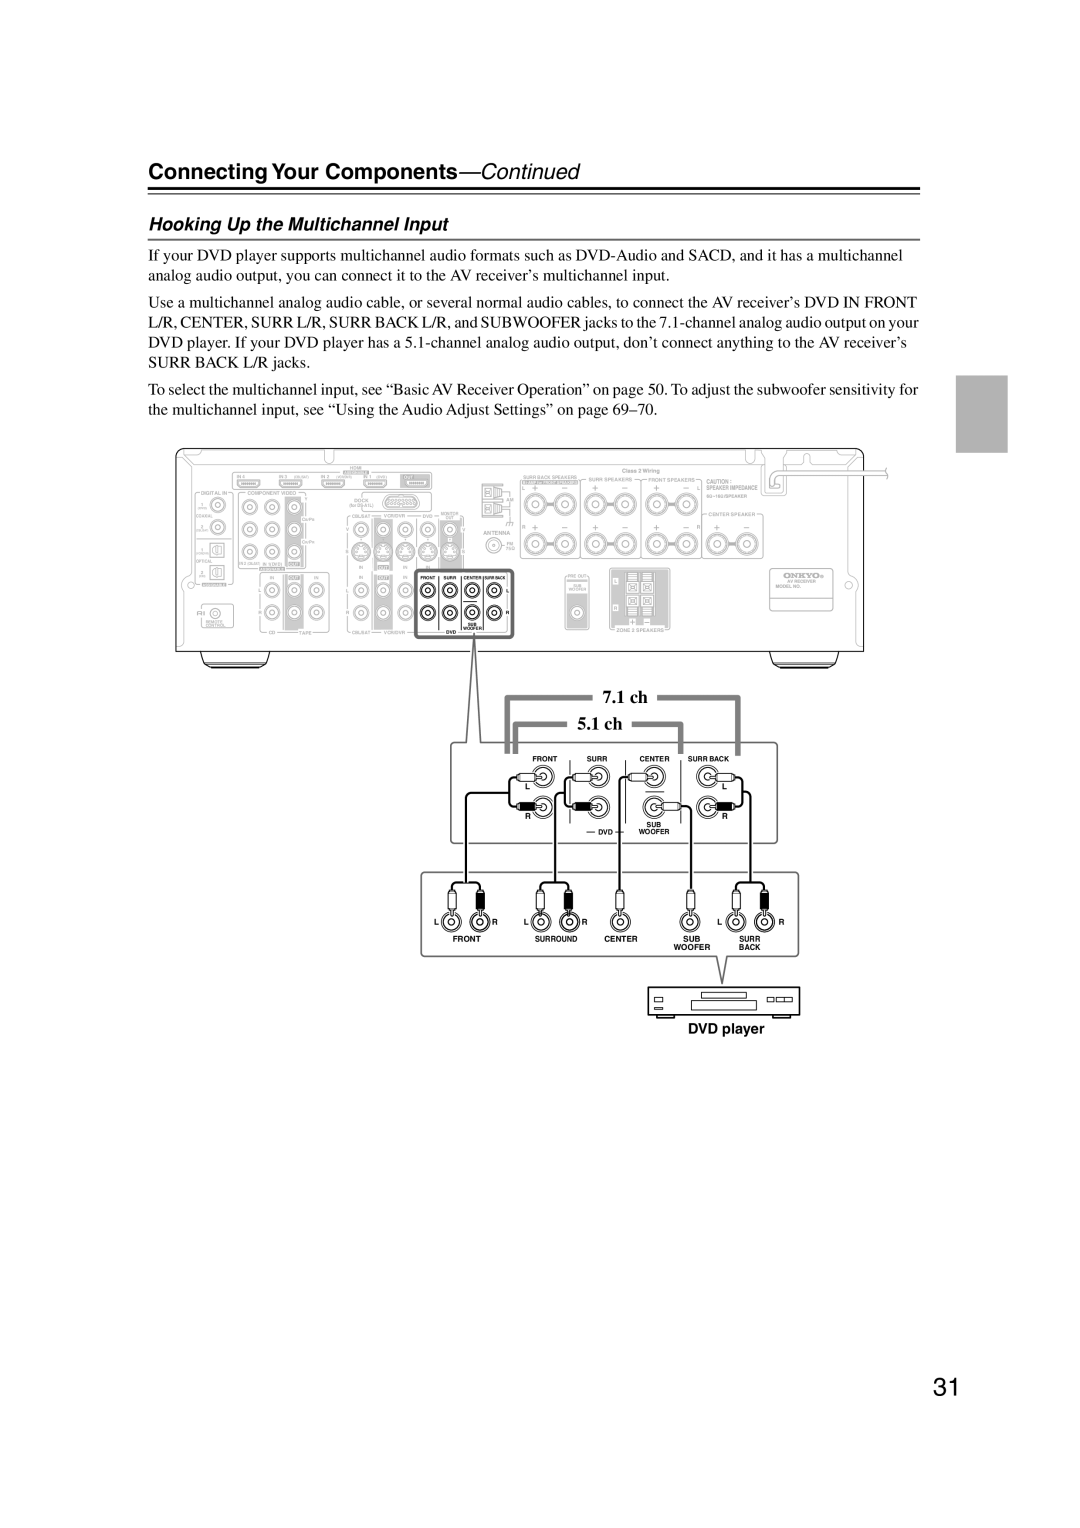 Onkyo HT-S6100 instruction manual Hooking Up the Multichannel Input, Connecting Your Components-Continued, 7.1 ch 5.1 ch 